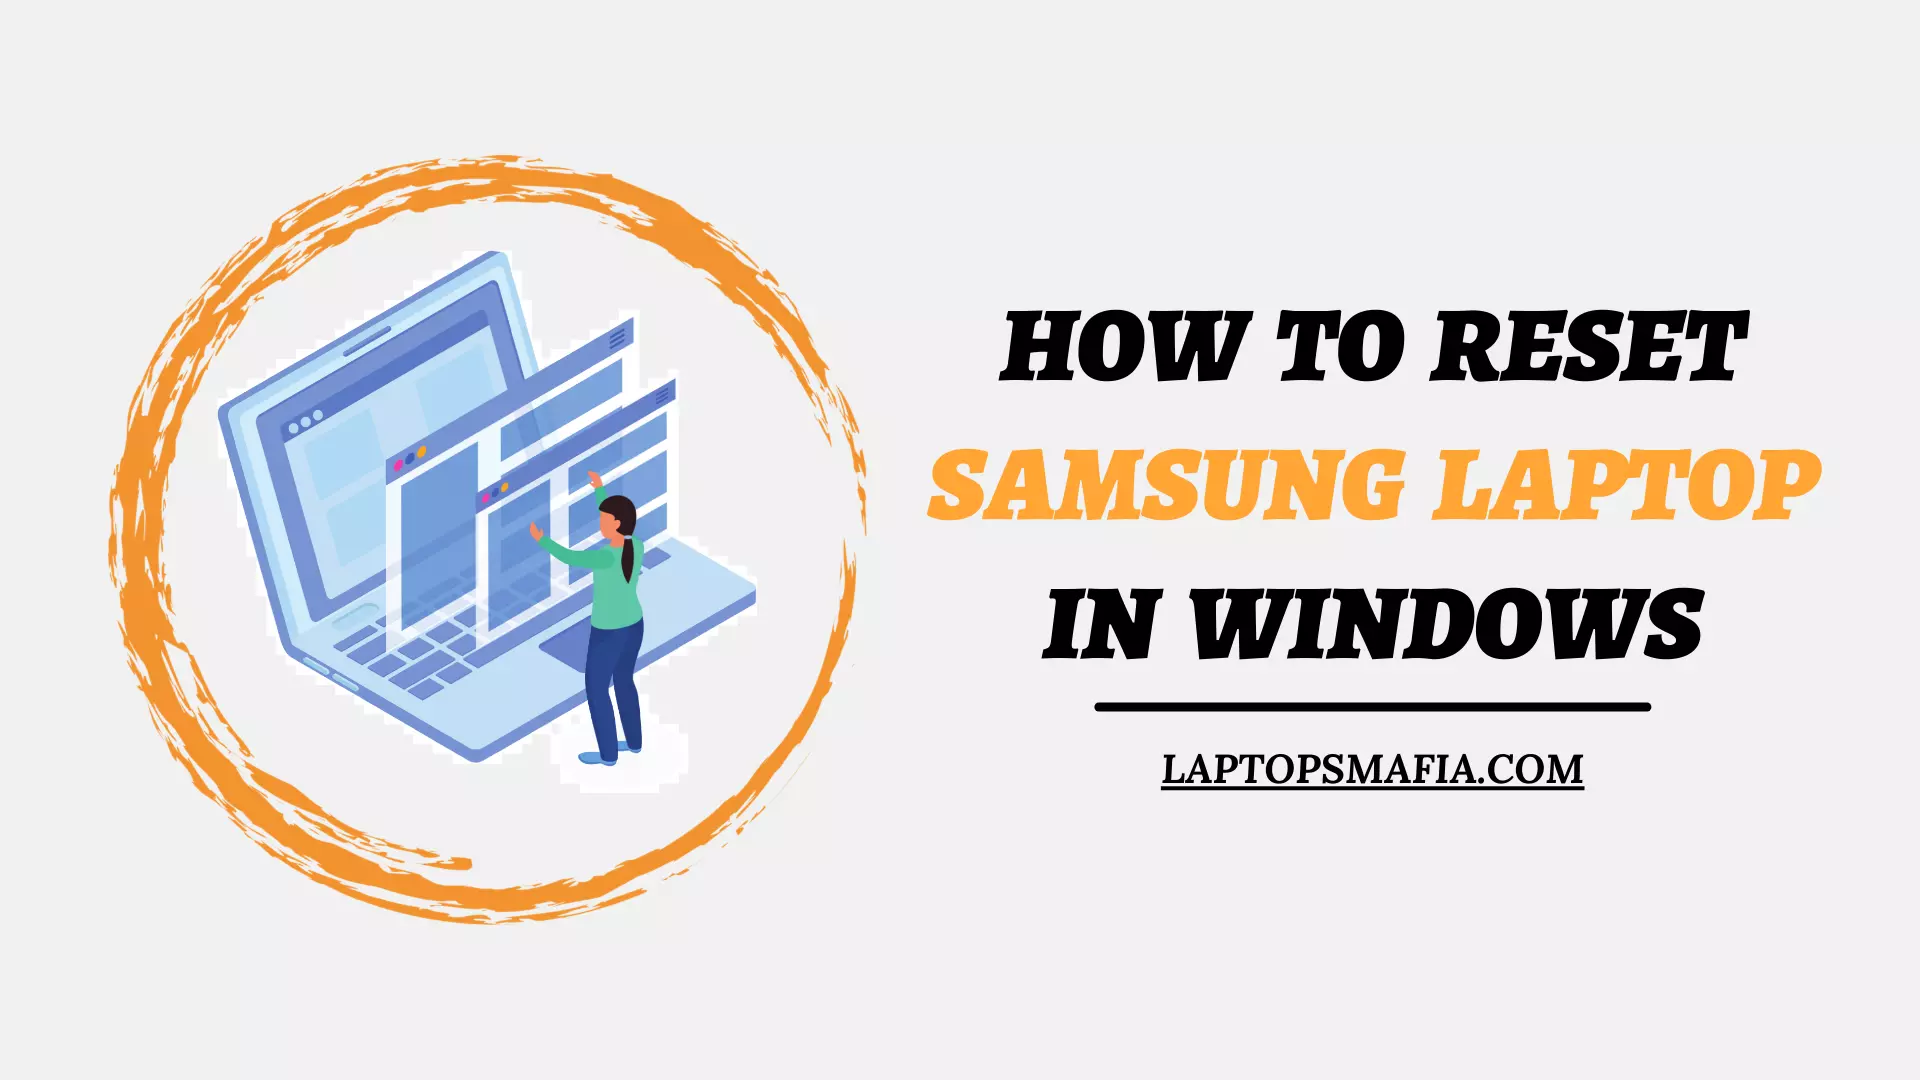 How to reset Samsung laptop in Windows